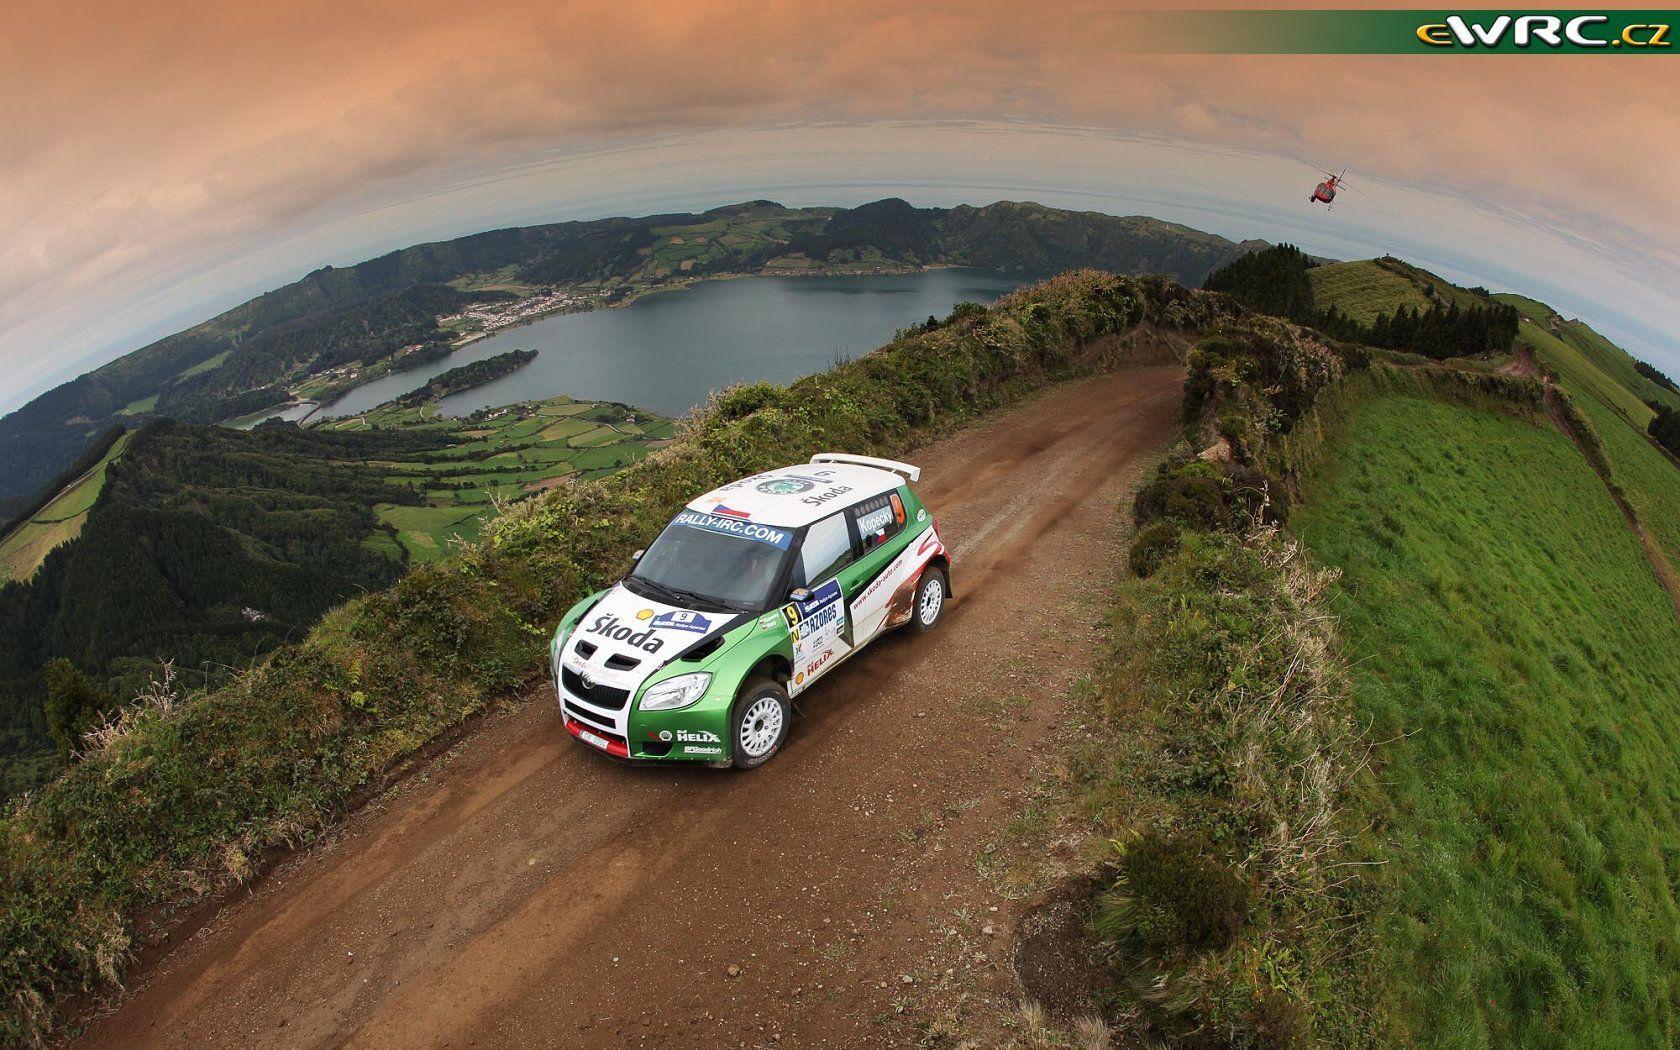 Rally Wallpaper Photo 27932 HD Picture. Best Wallpaper Photo